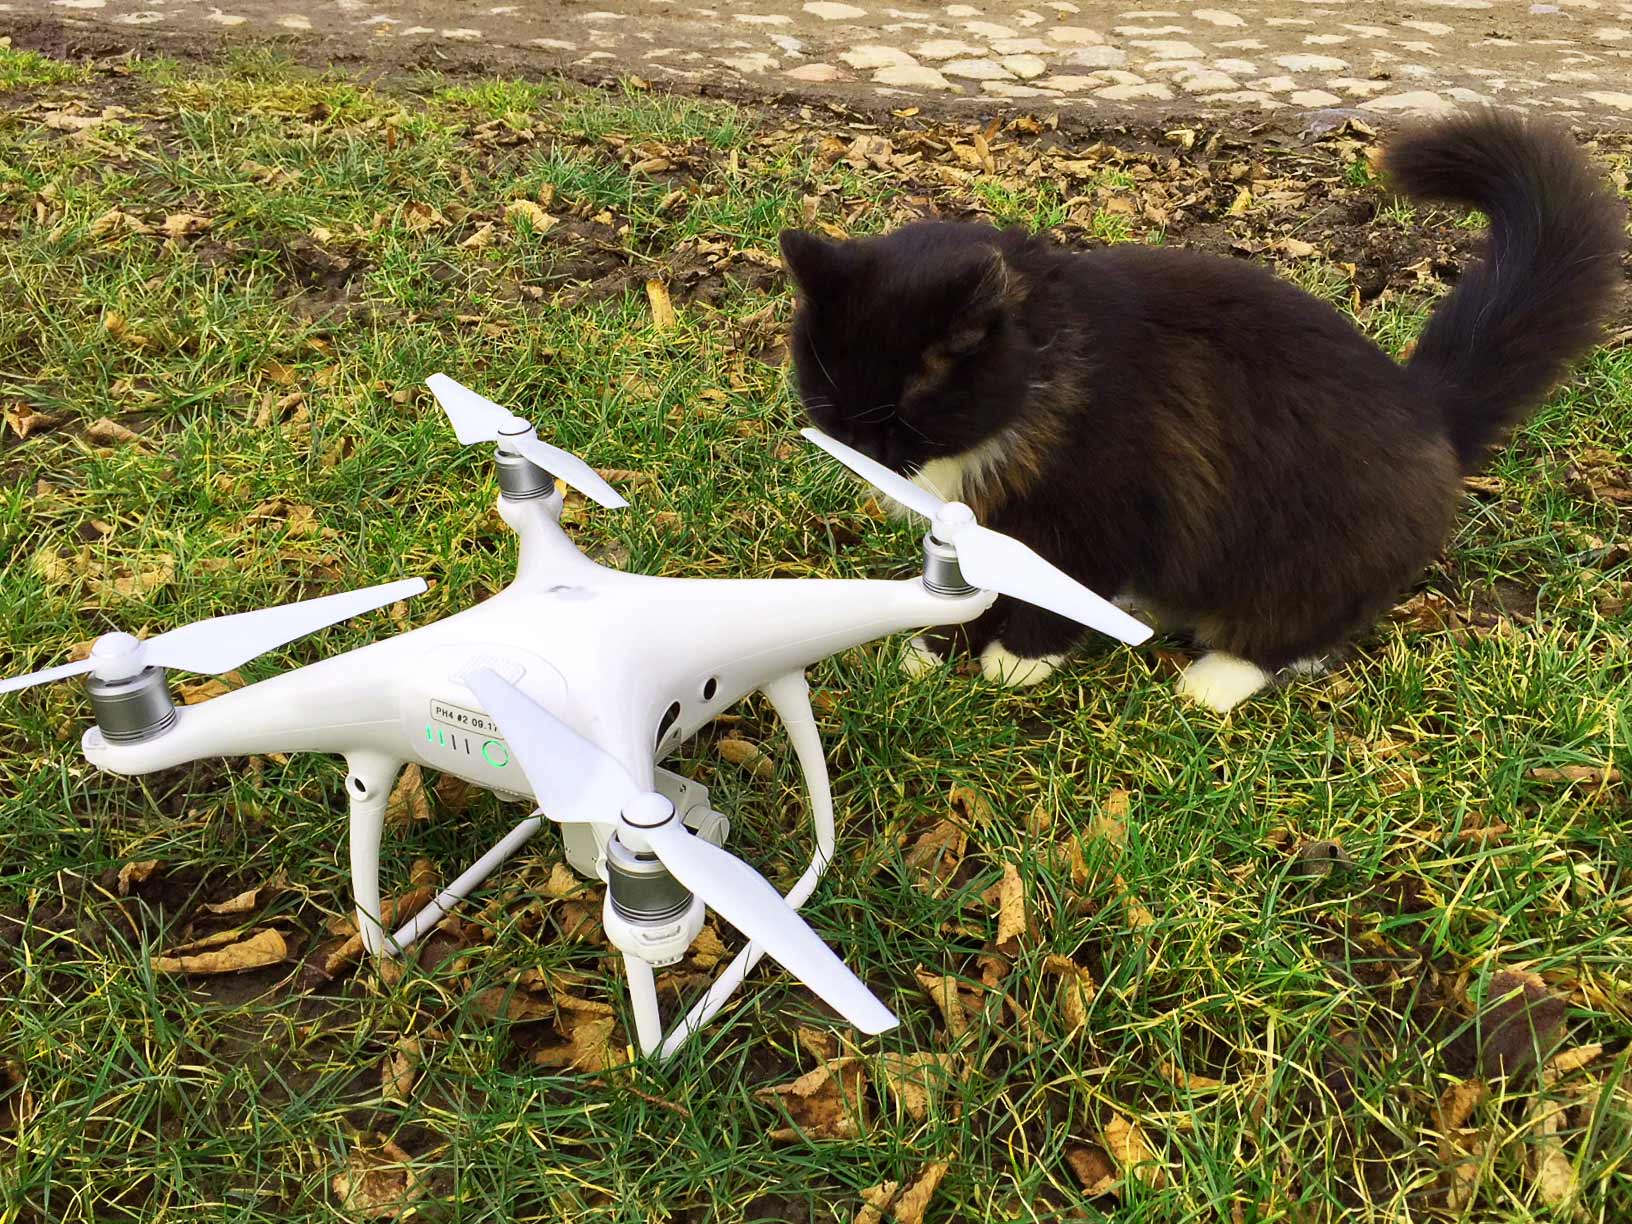 A cat sniffing the drone on the ground